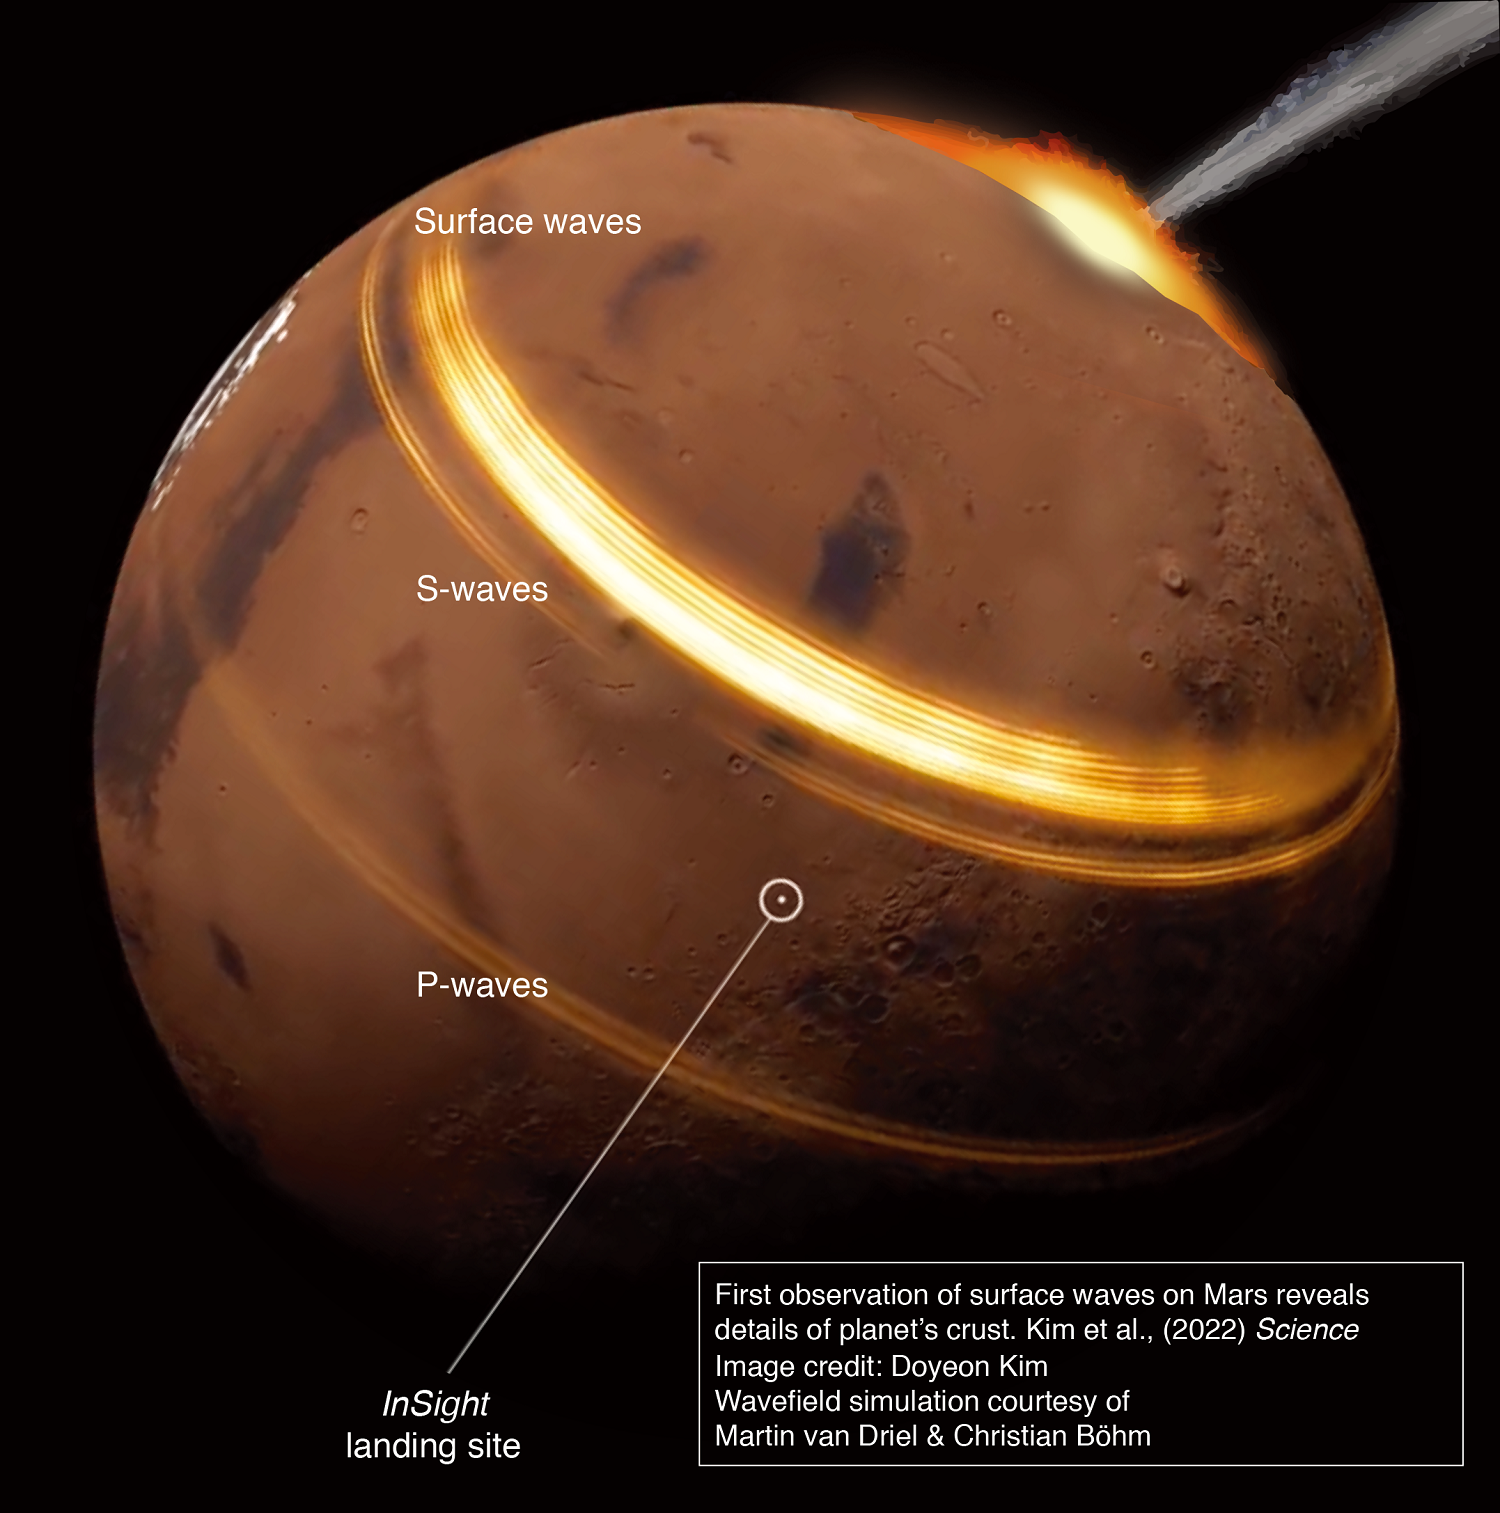 Mars diagram showing meteor impact and three kinds of seismic waves: surface, body, and p